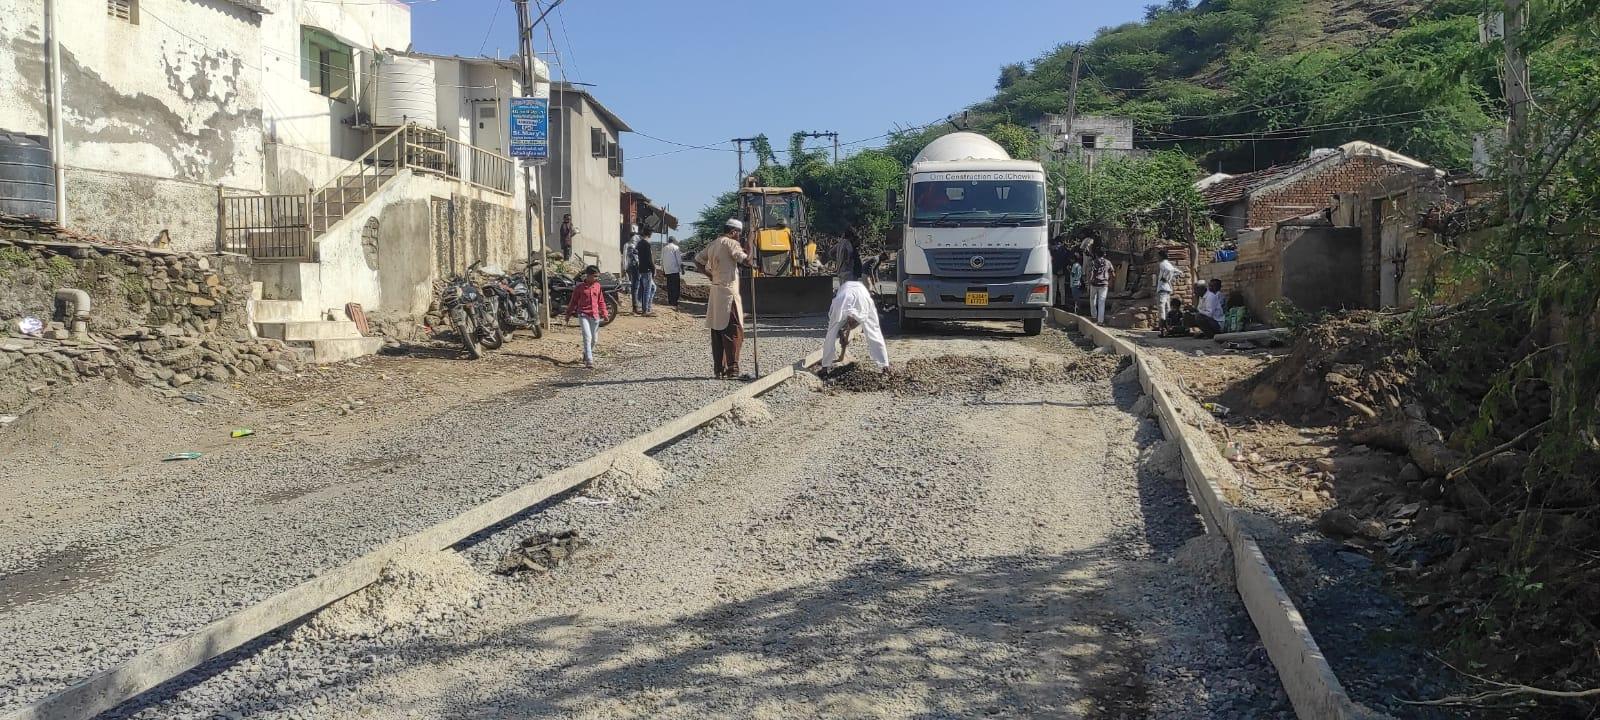 Due to the road work, traffic was stopped from Tana Chowk of Sihore to Surka Darwaza Lilapir.